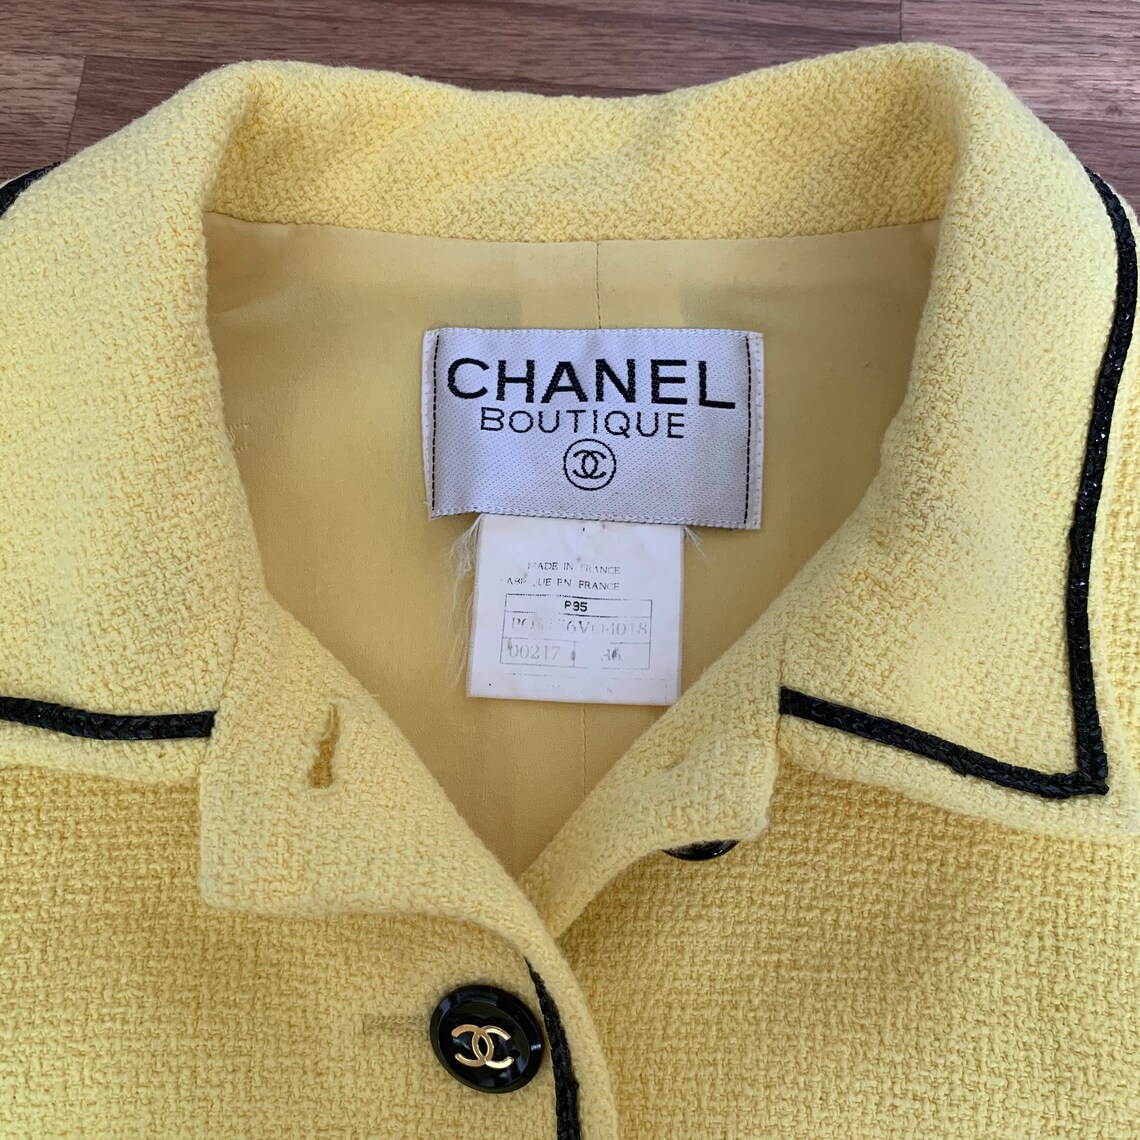 Vintage Chanel S/S 1995 yellow crop jacket | Etsy